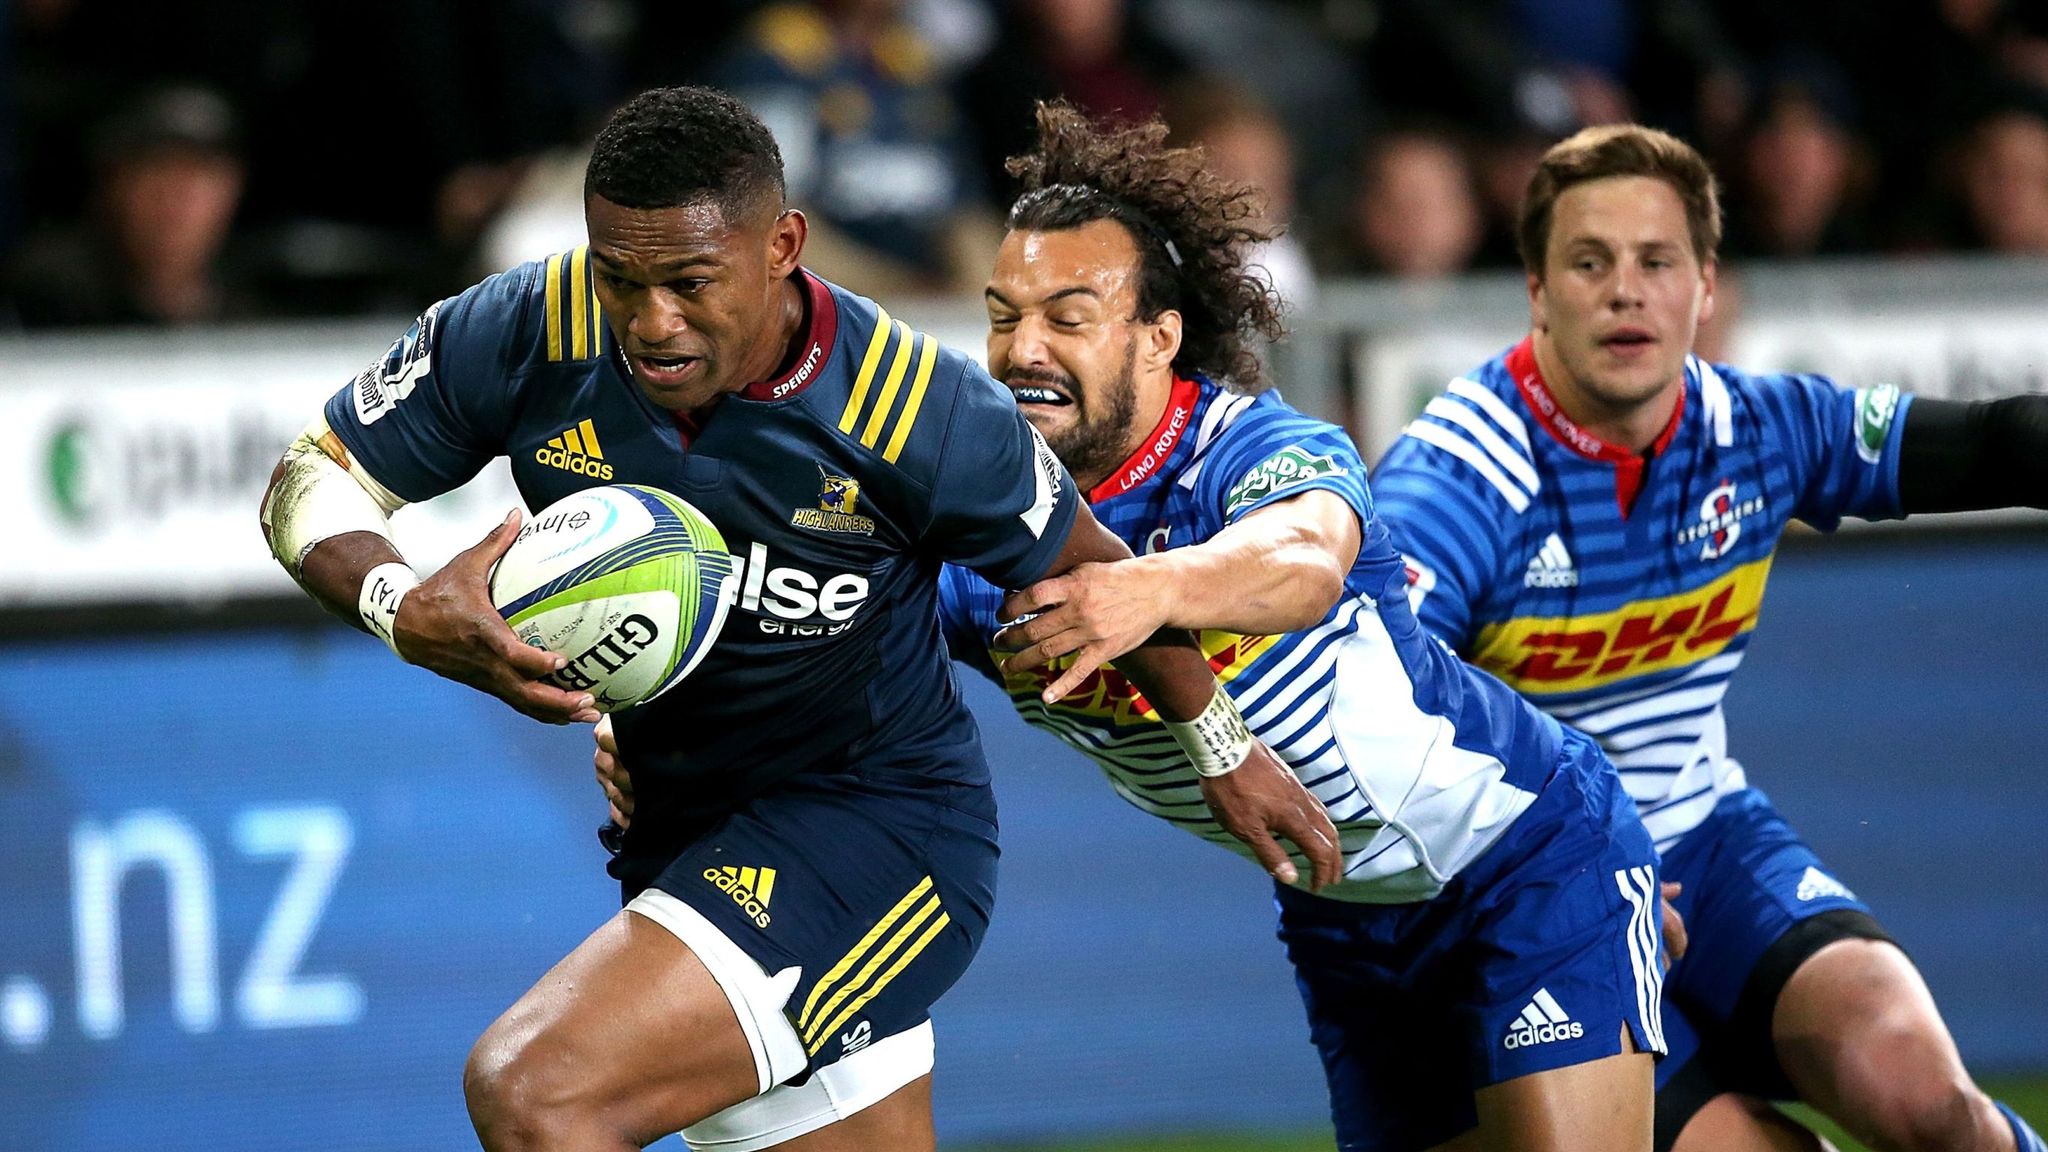 Highlanders 57-14 Stormers Highlanders in nine-try rout Rugby Union News Sky Sports